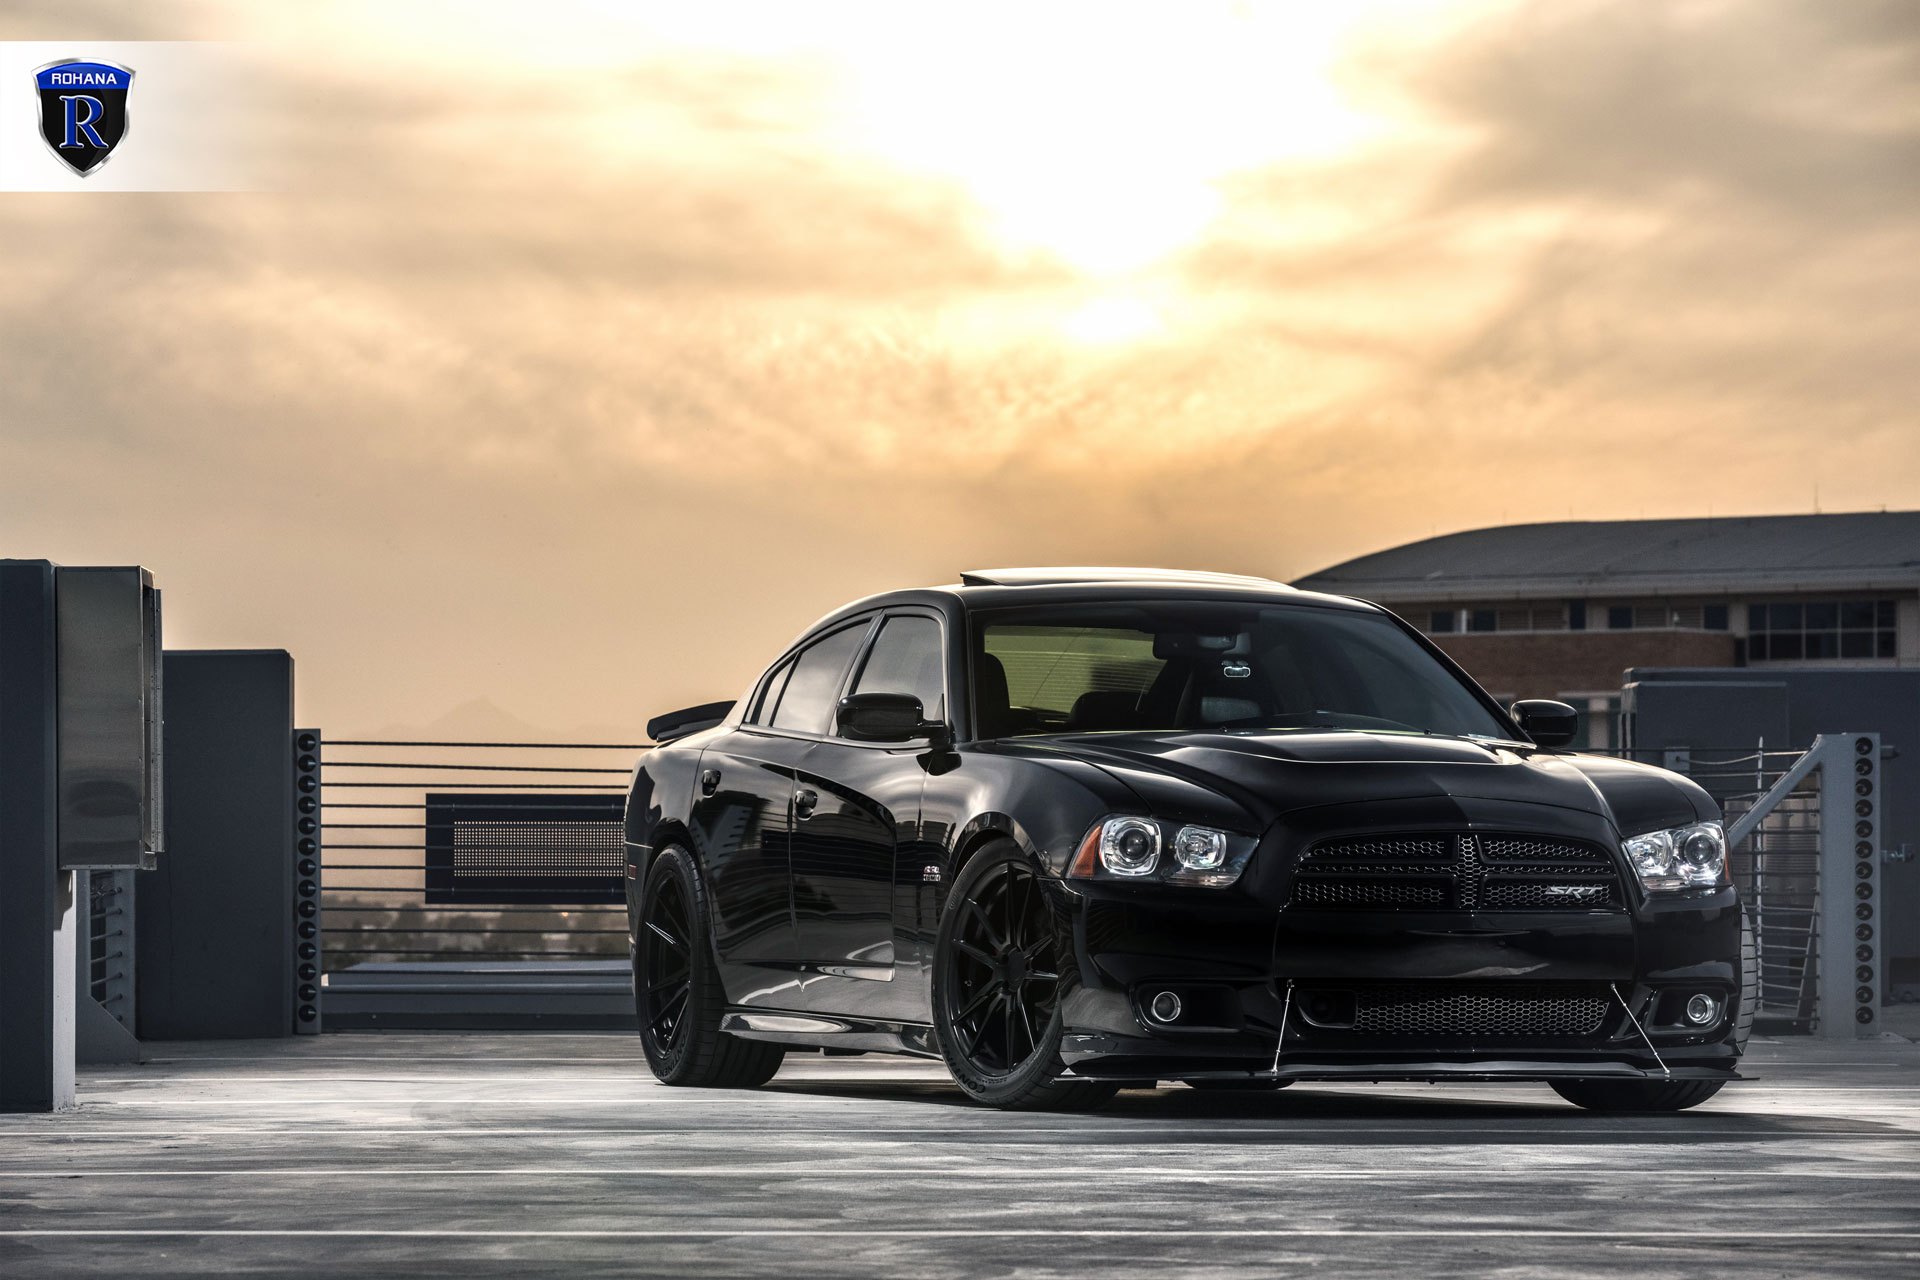 Black Dodge Charger SRT with Custom Mesh Grille - Photo by Rohana Wheels